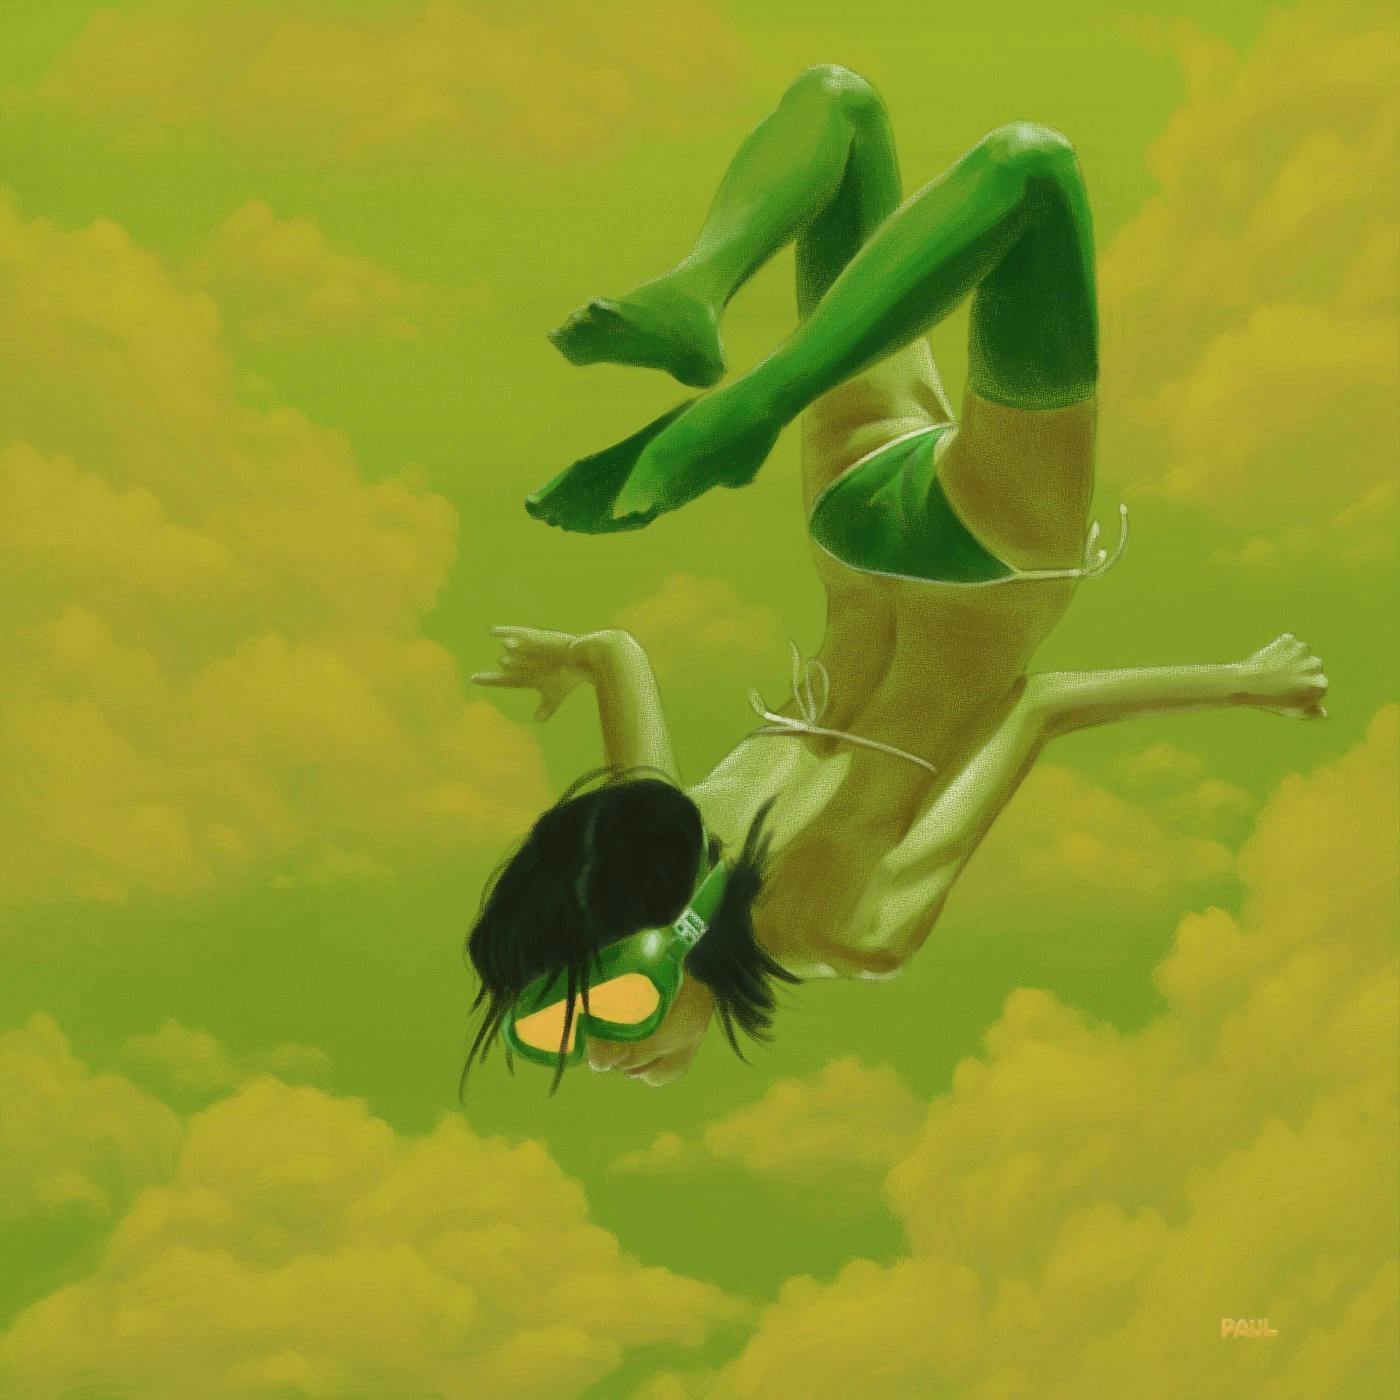 A digital painting of a woman in a green bikini and green stockings diving through the air among a green sky with yellow clouds.